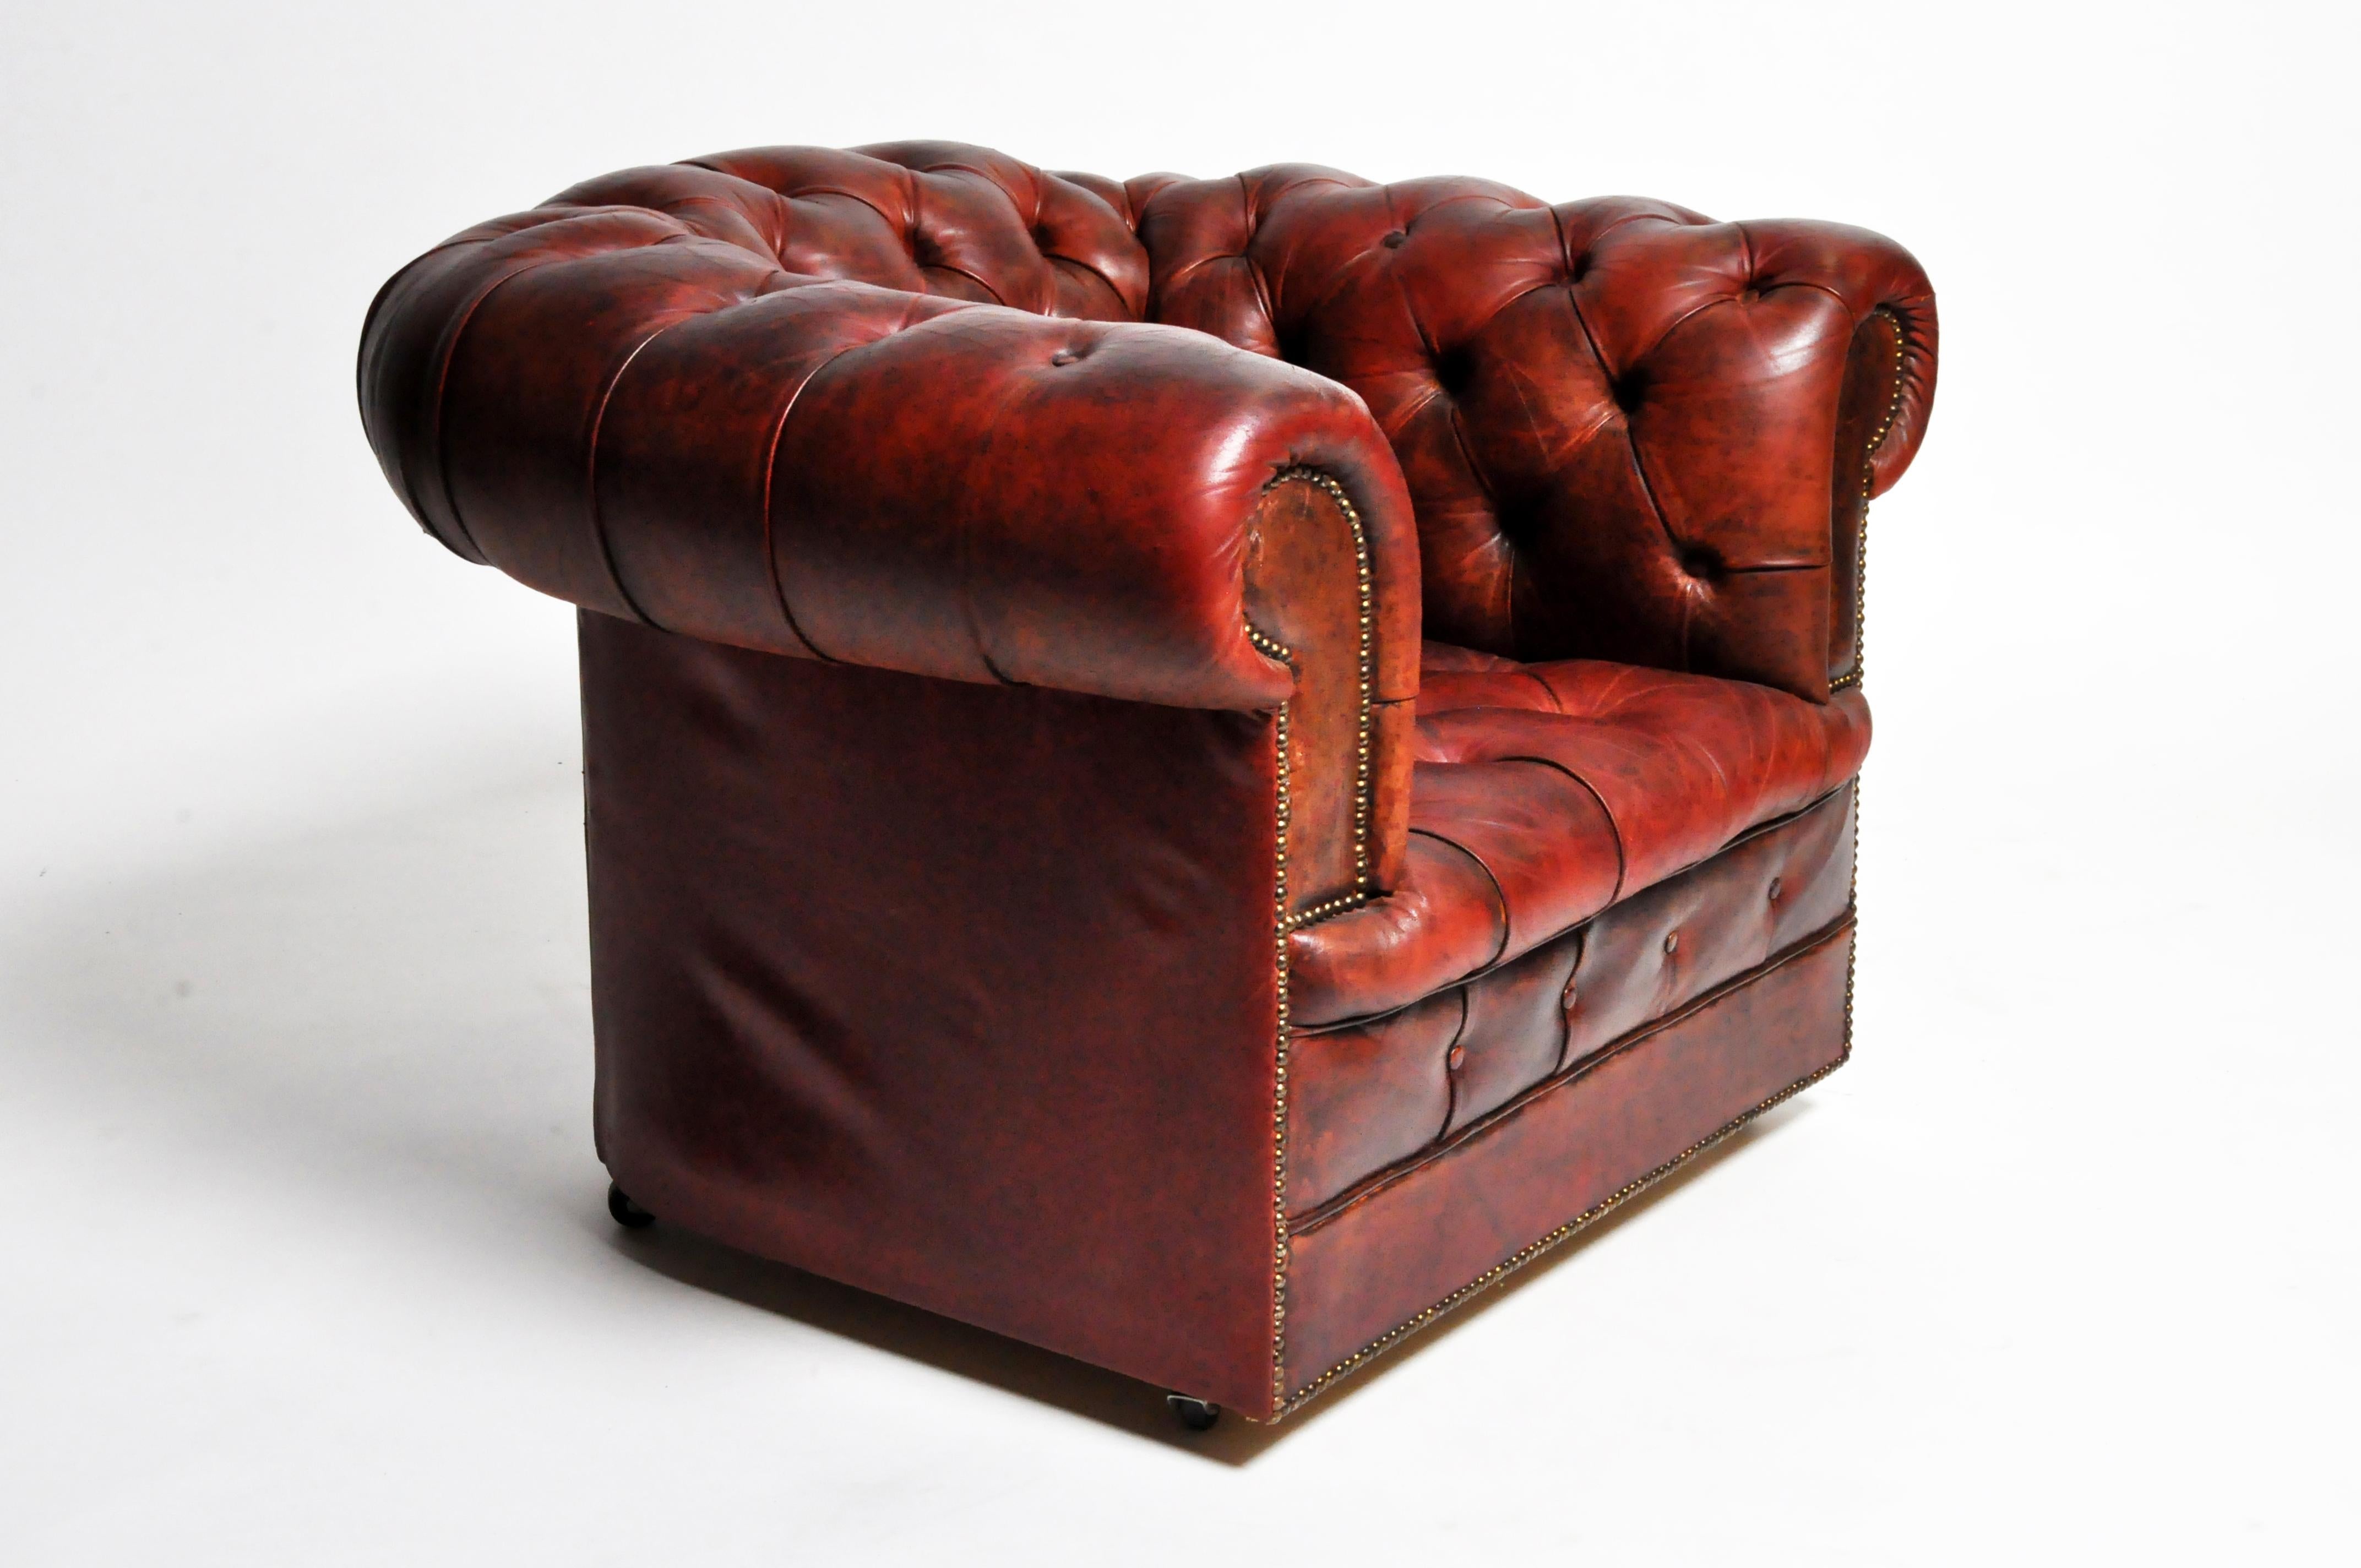 This Classic Chesterfield design is the definition of old fashioned luxury. True to form and style, a myriad of button tufts create a quilted texture that covers the back, seat and rolled arms of each piece. The unique design and choice of leather